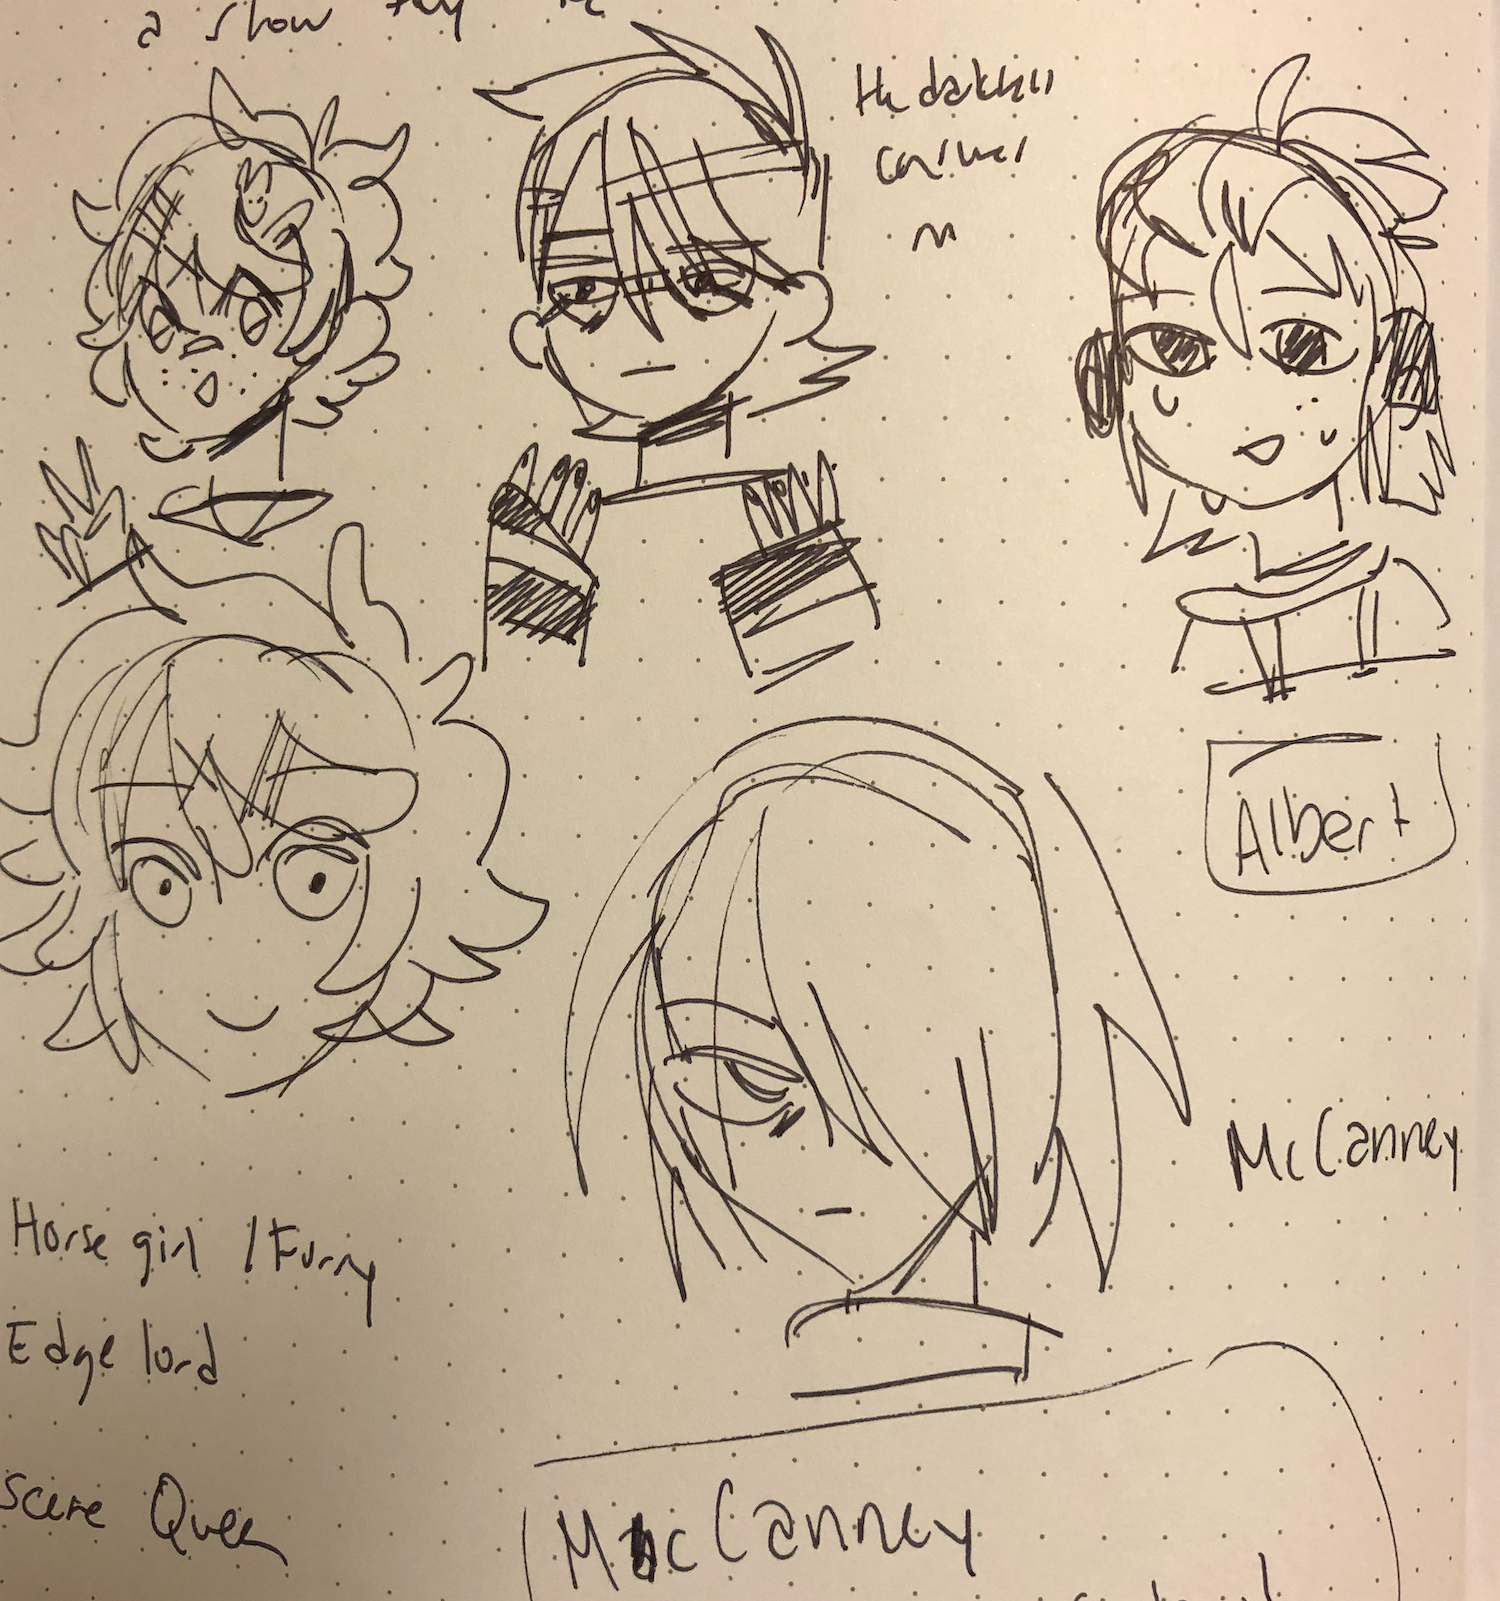 These are sketches to plan out the characters in McCanney Middle School Anime Club. This page featured explorations of the hairstyles for Sarah, Jasper, and Caroline. Caroline is shown with her bangs pinned back into a messy ponytail and Sarah is drawn with many decorative hair clips in her hair. Jasper's bangs are shorter to reveal his eyes.